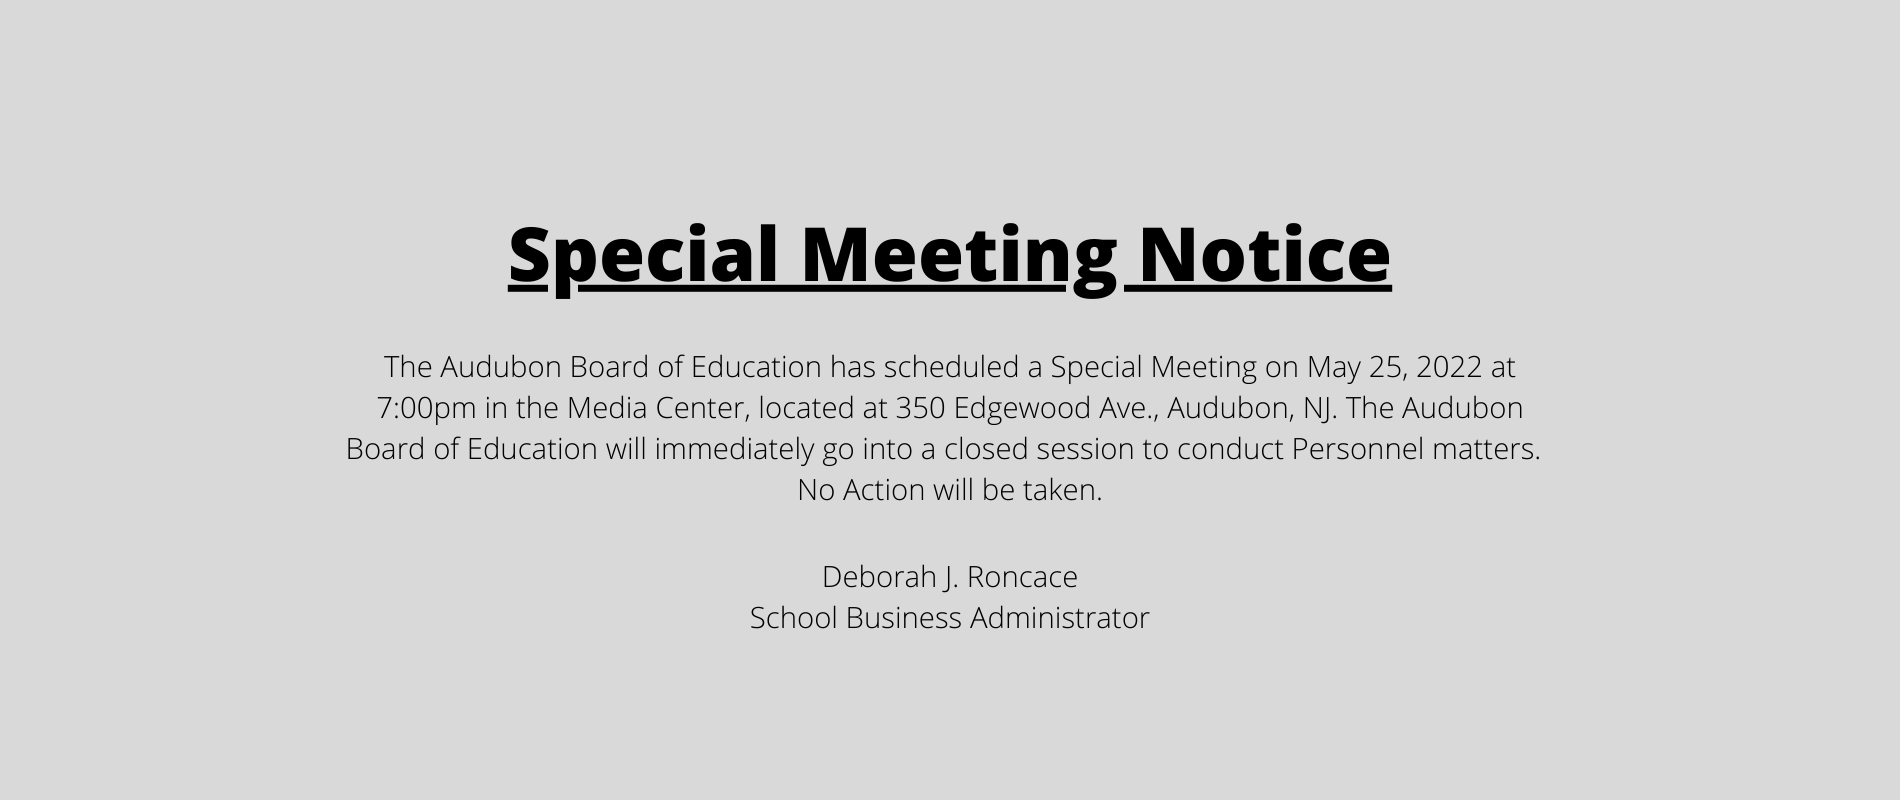 Special Meeting Notice - May 25, 2022